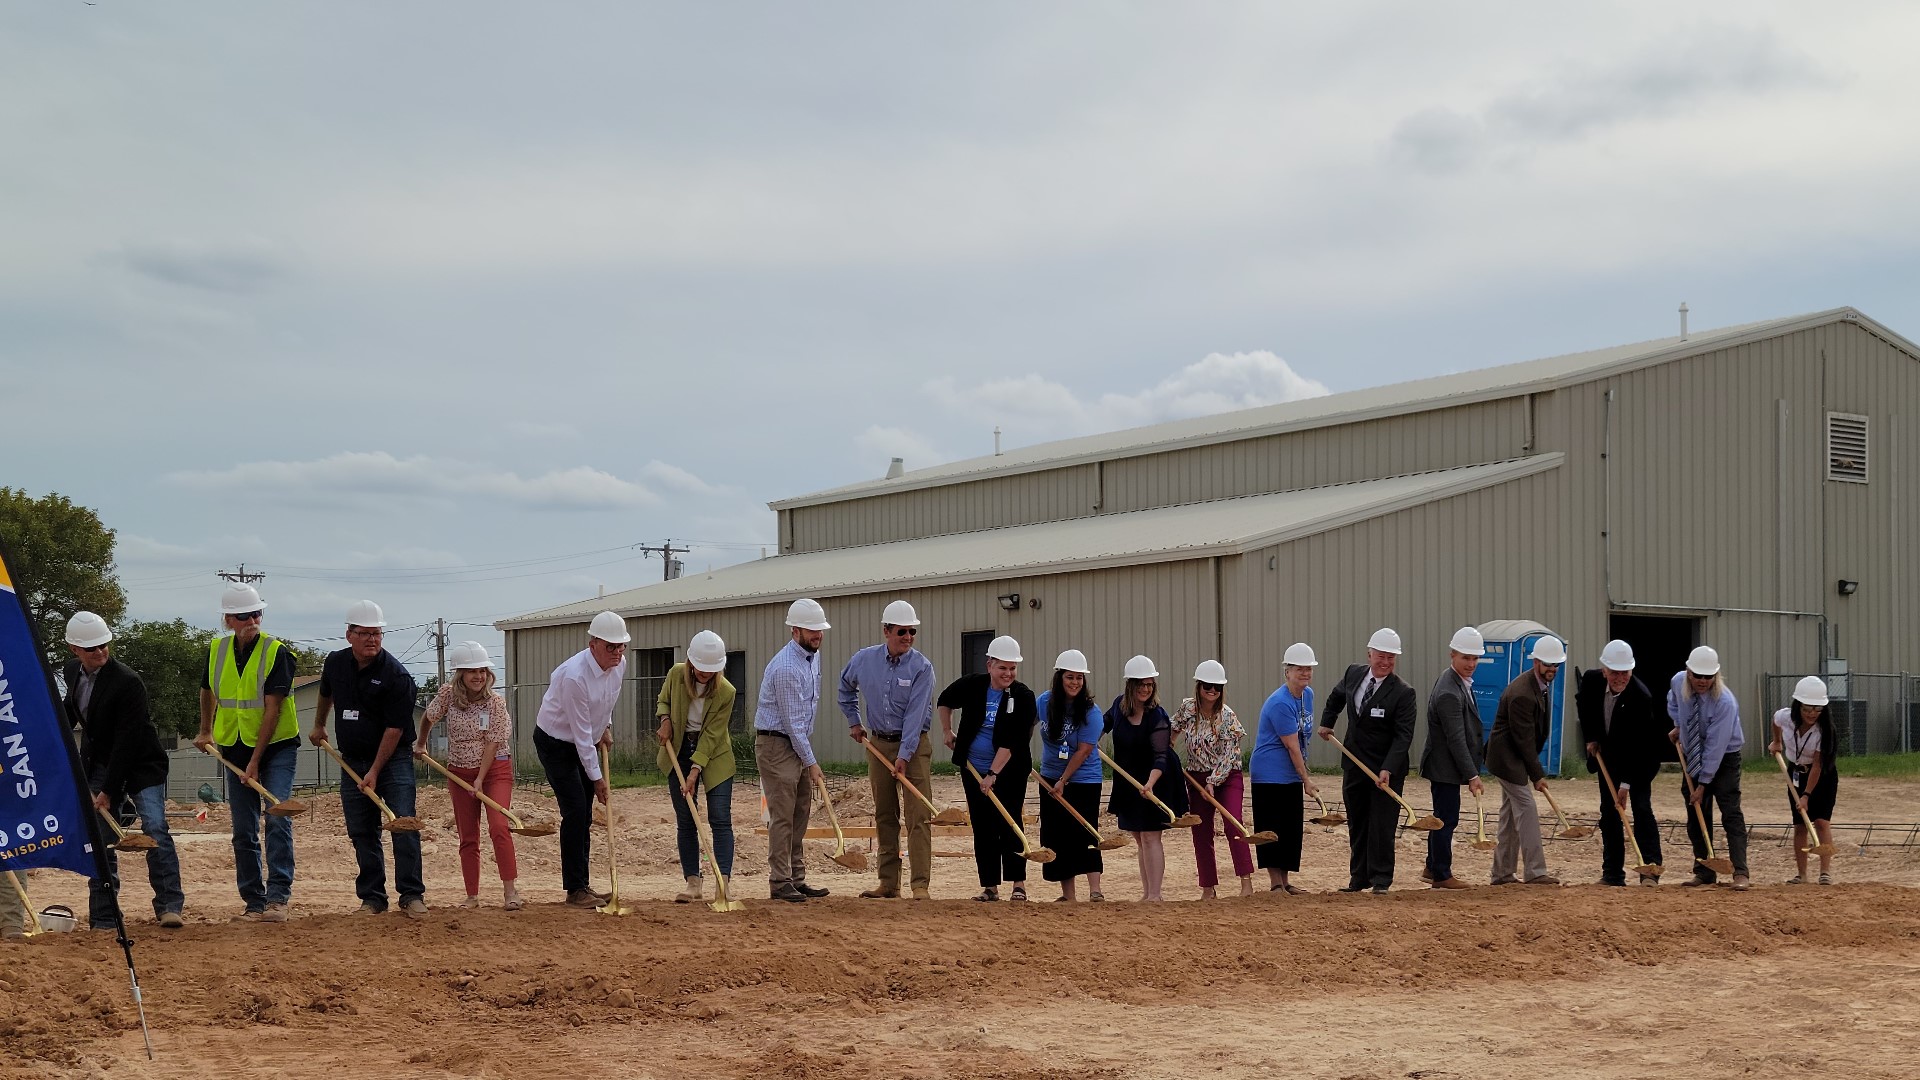 A groundbreaking ceremony was held Monday at Fannin Elementary School to mark the campus expansion.